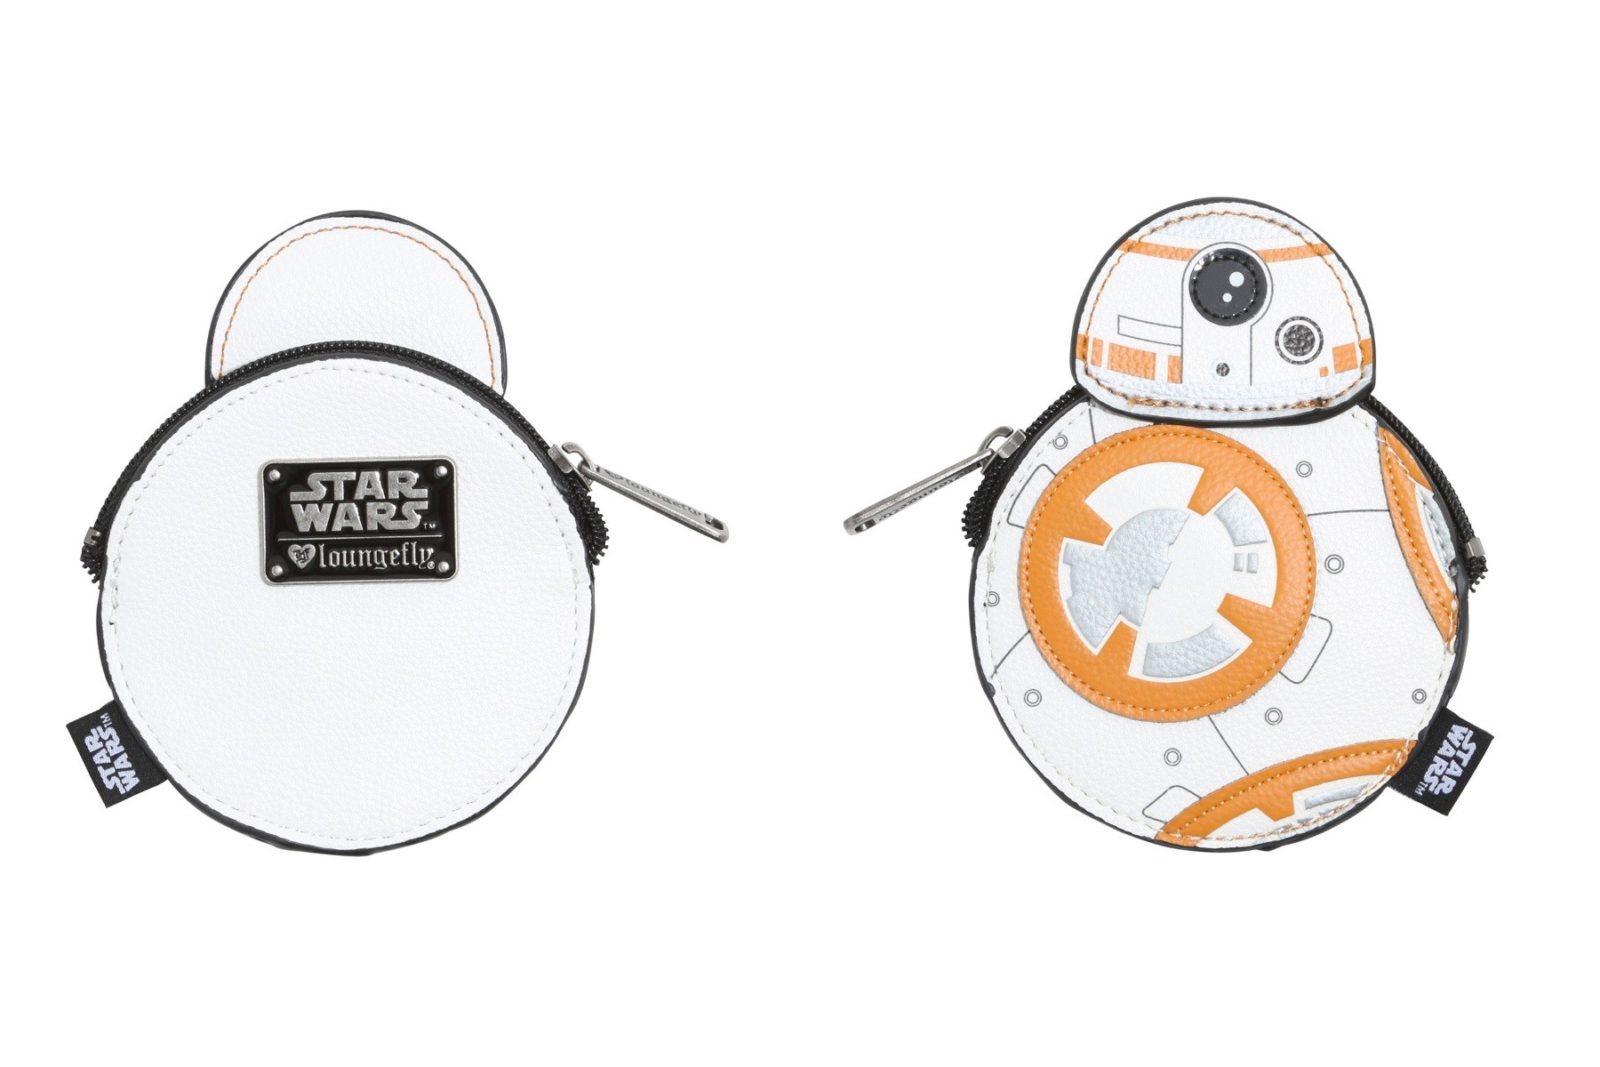 Loungefly BB-8 coin purse at Hot Topic